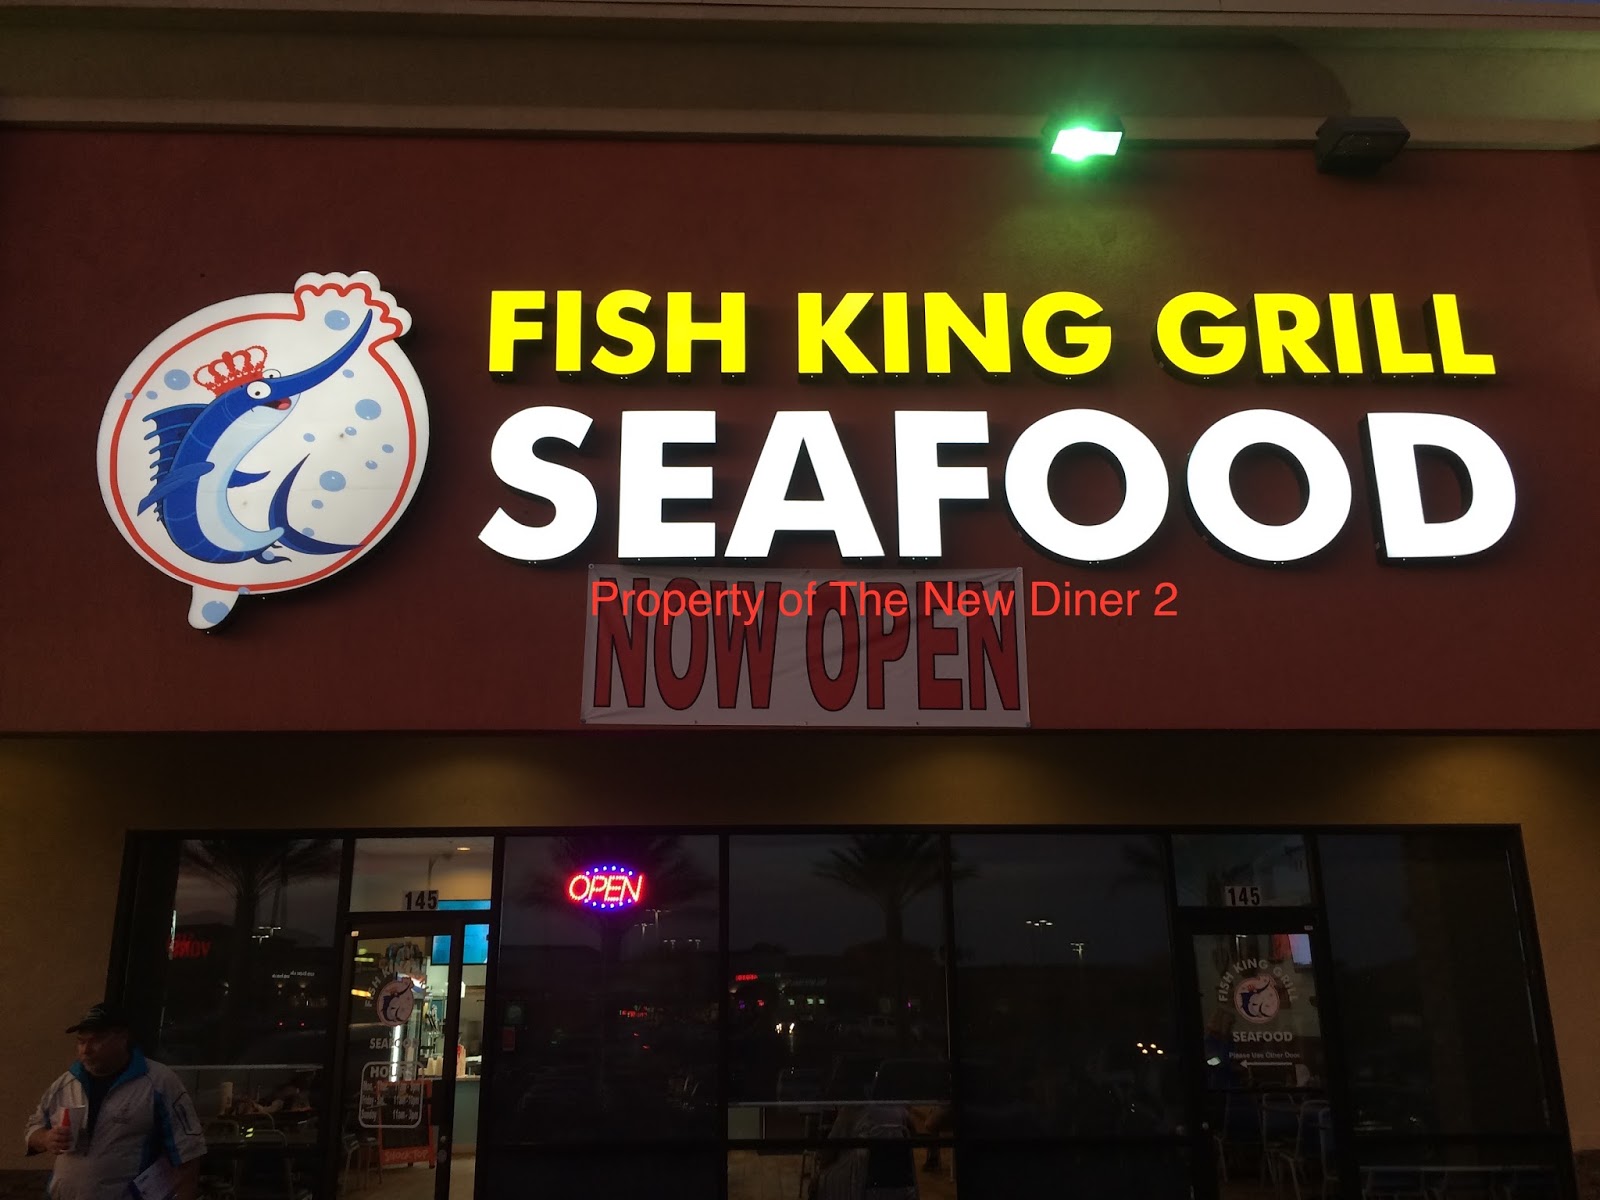 The New Diner 2 Fish King Grill